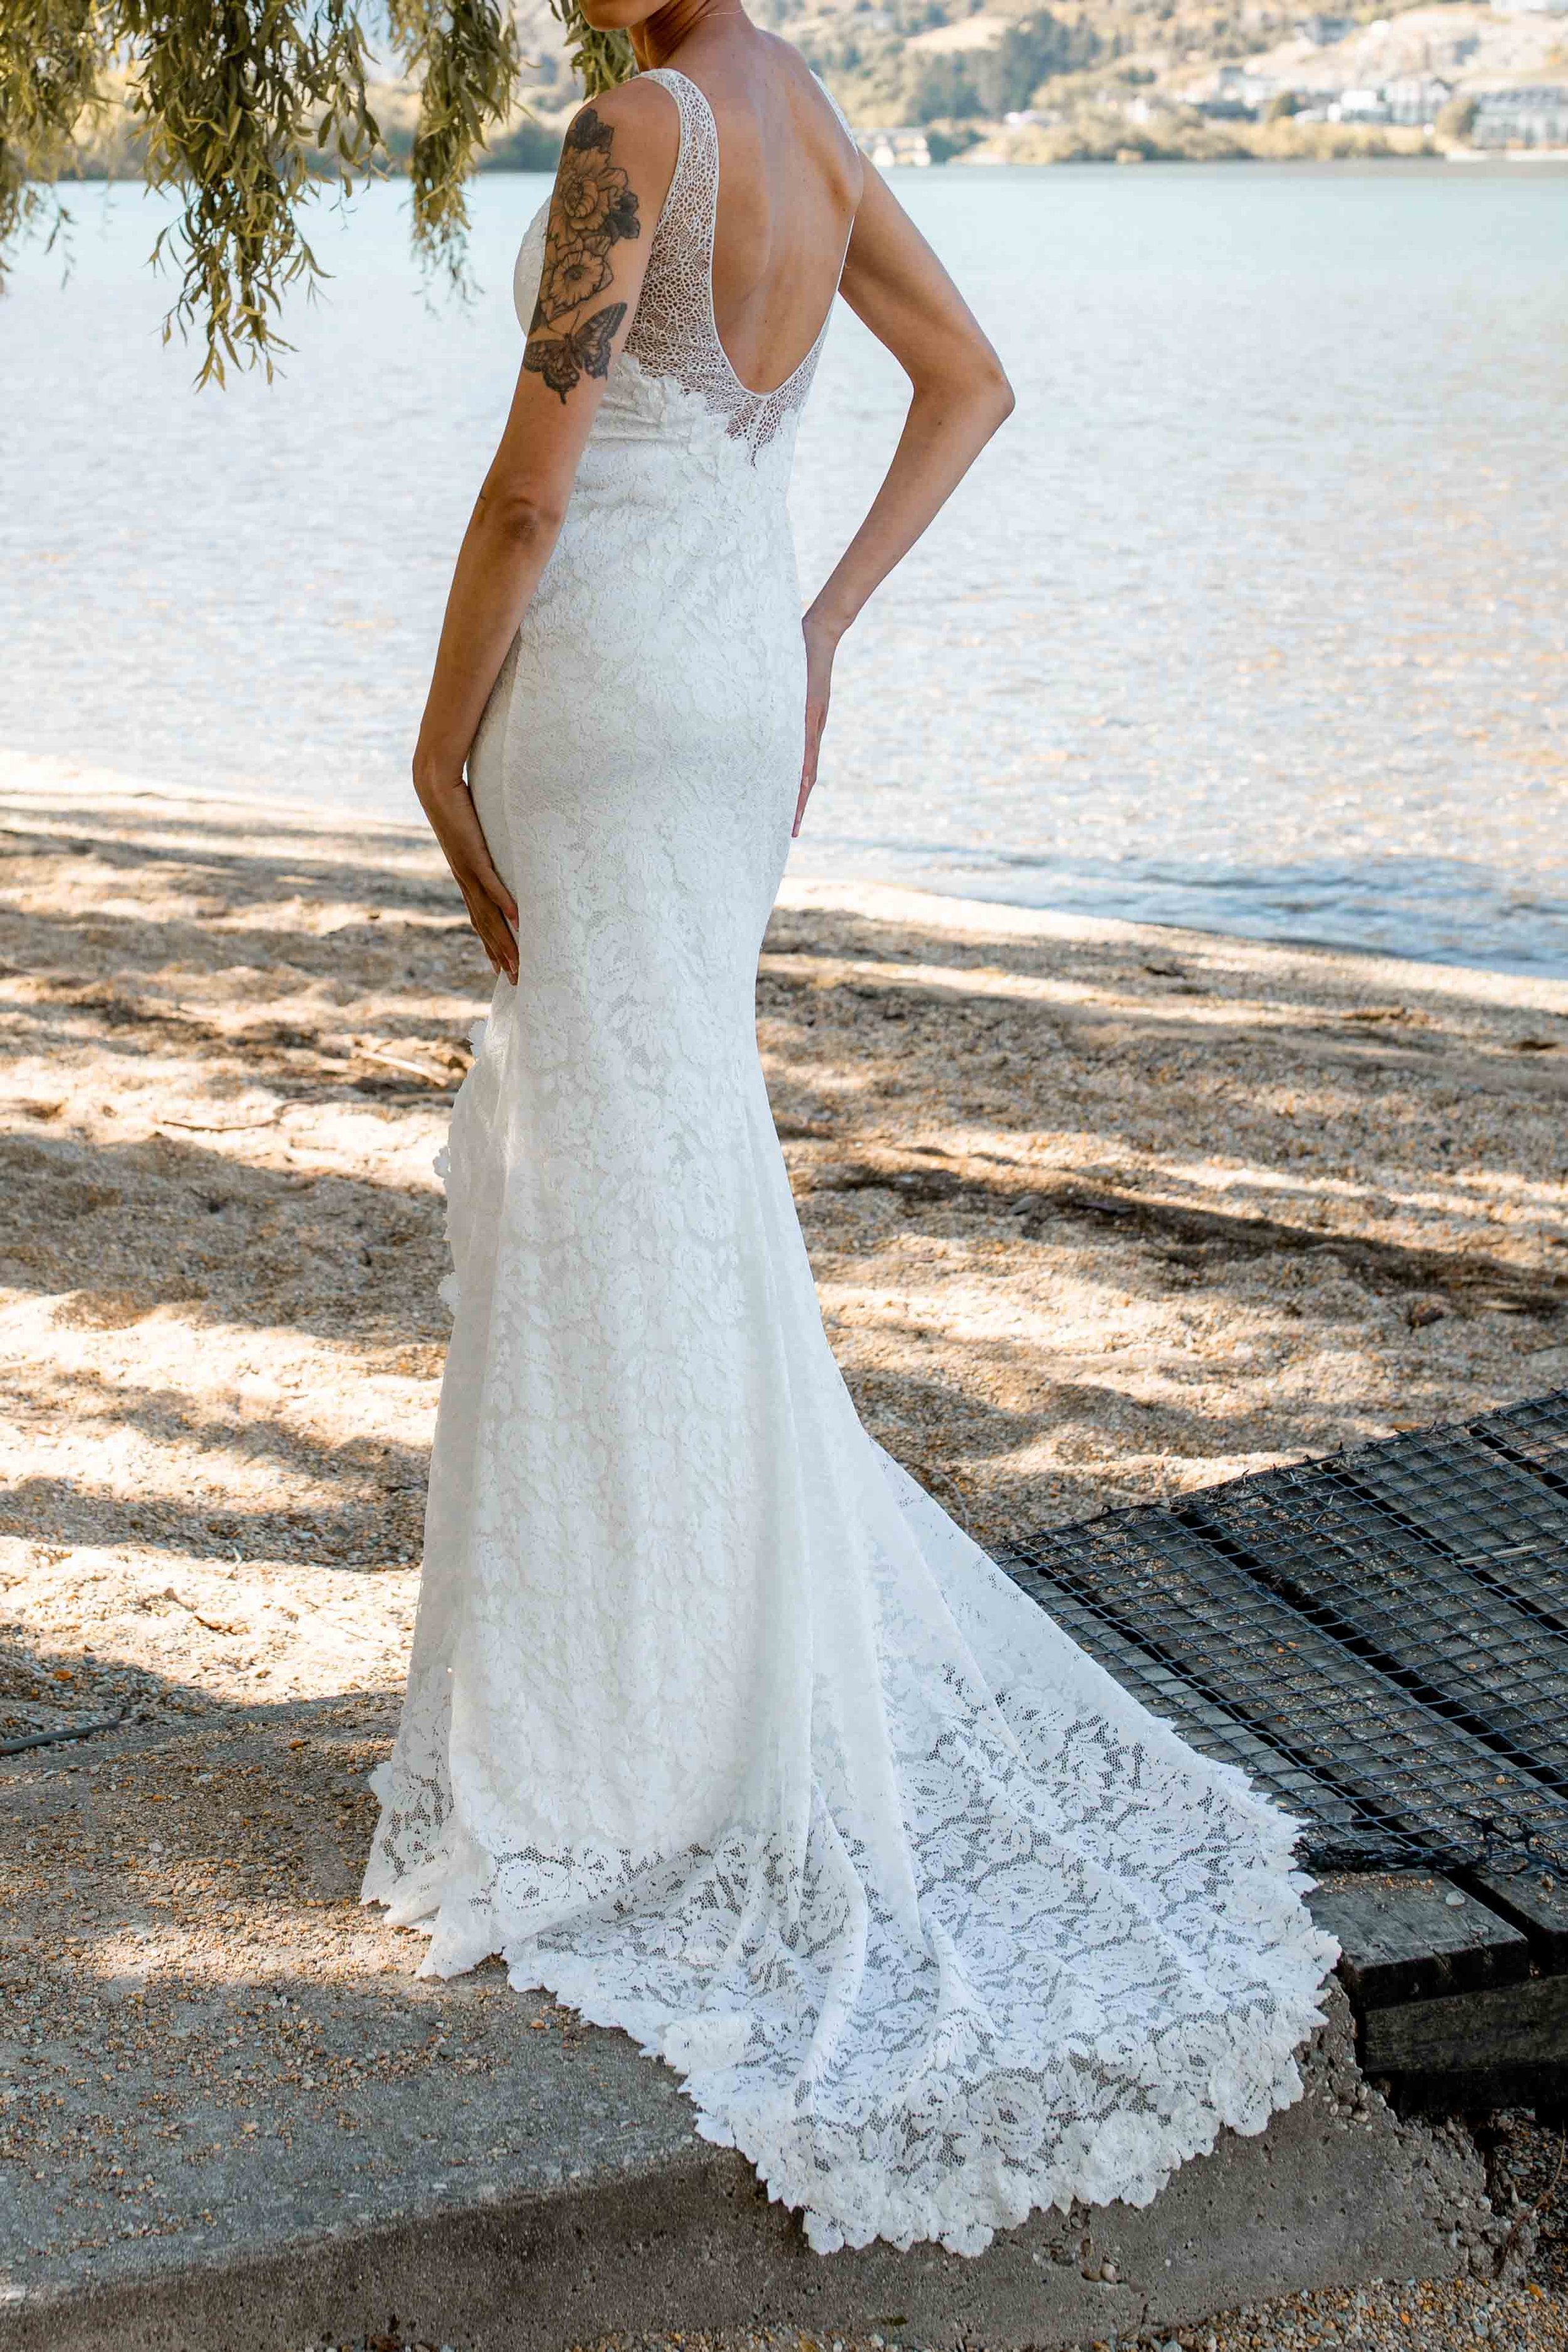 Kate Dress - Nemo Bridal Couture Queenstown New Zealand 0V9A2416.jpg